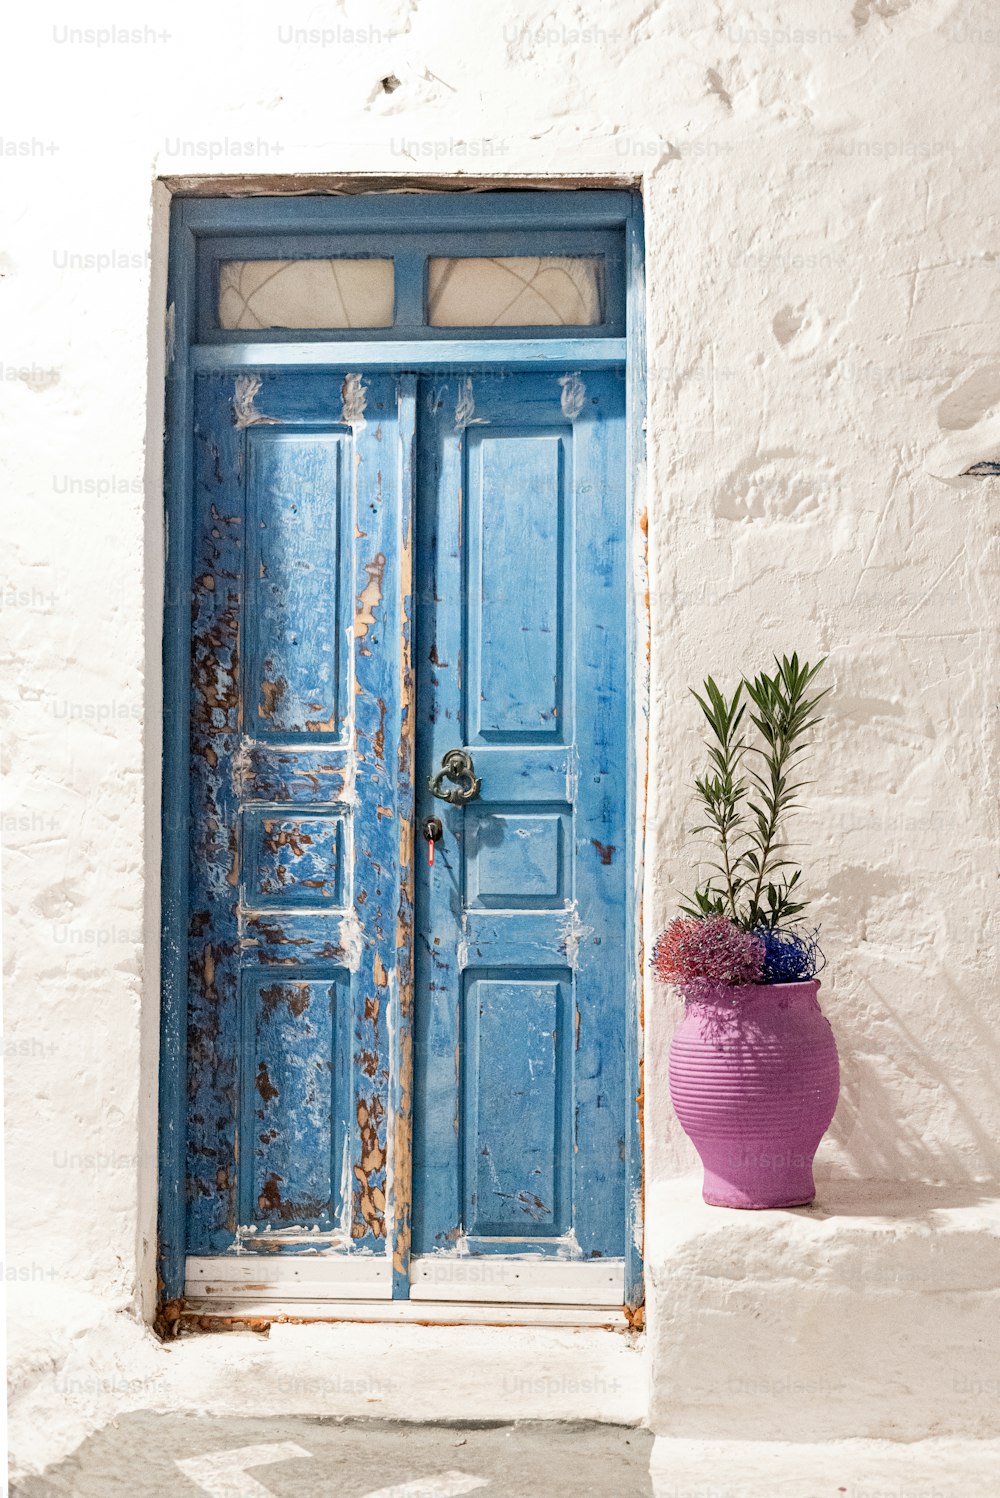 a blue door and a purple potted plant in front of it